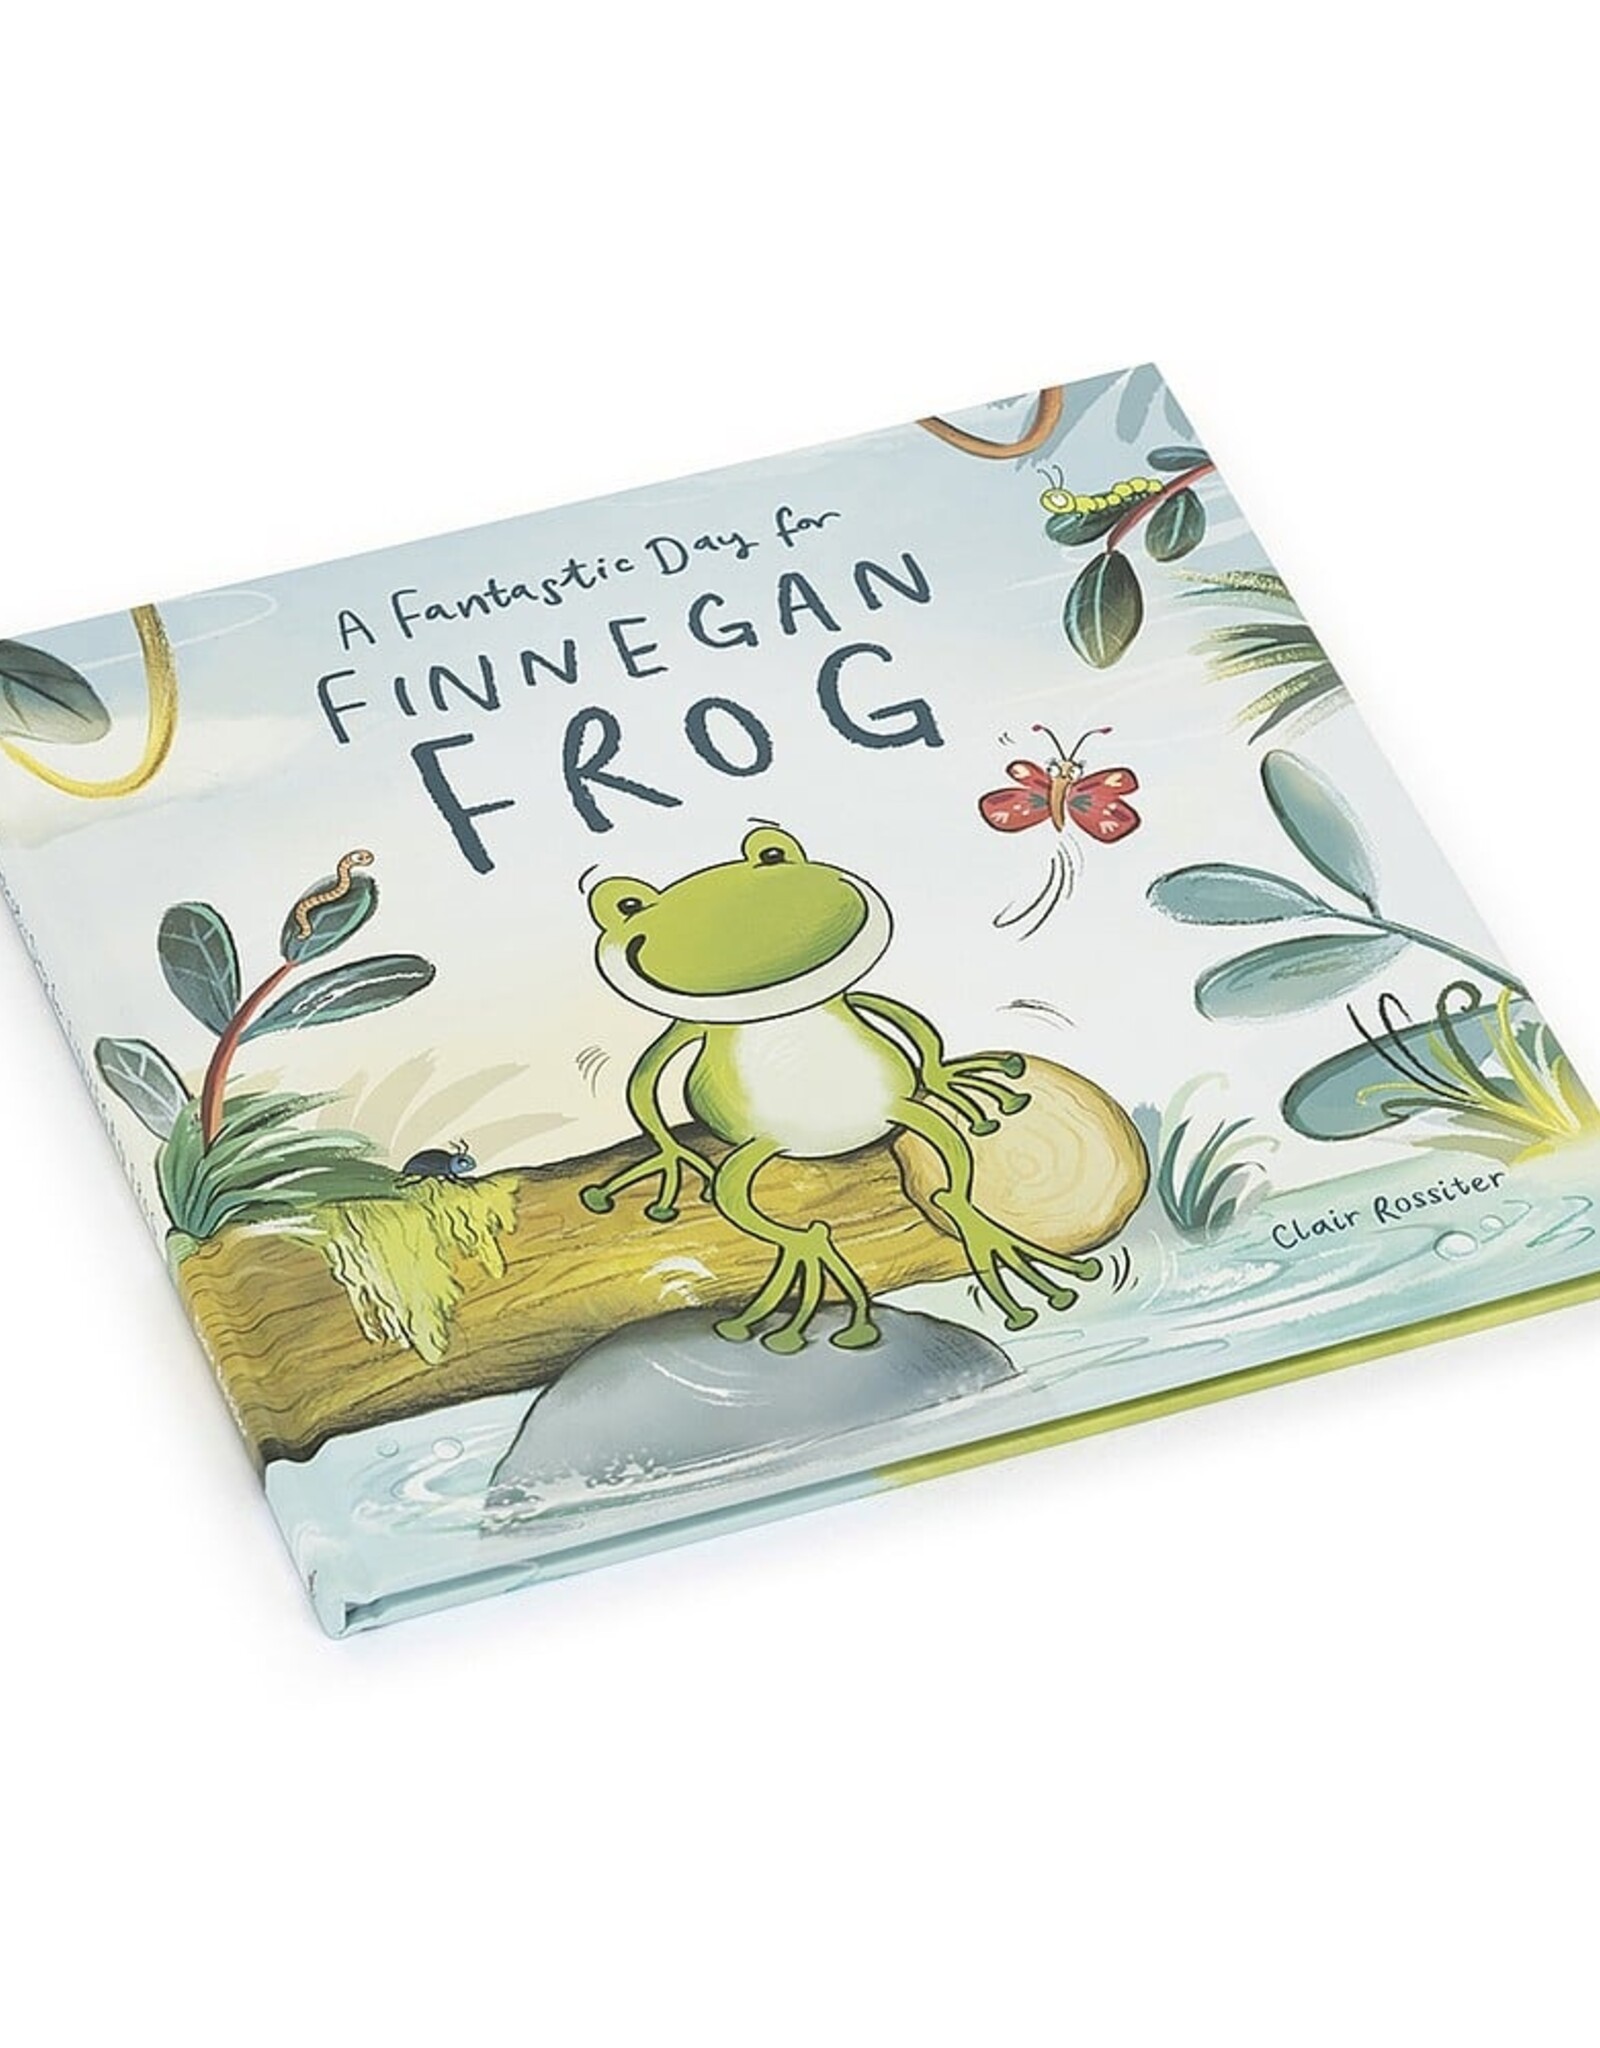 Jellycat A Fantastic Day for Finnegan Frog book